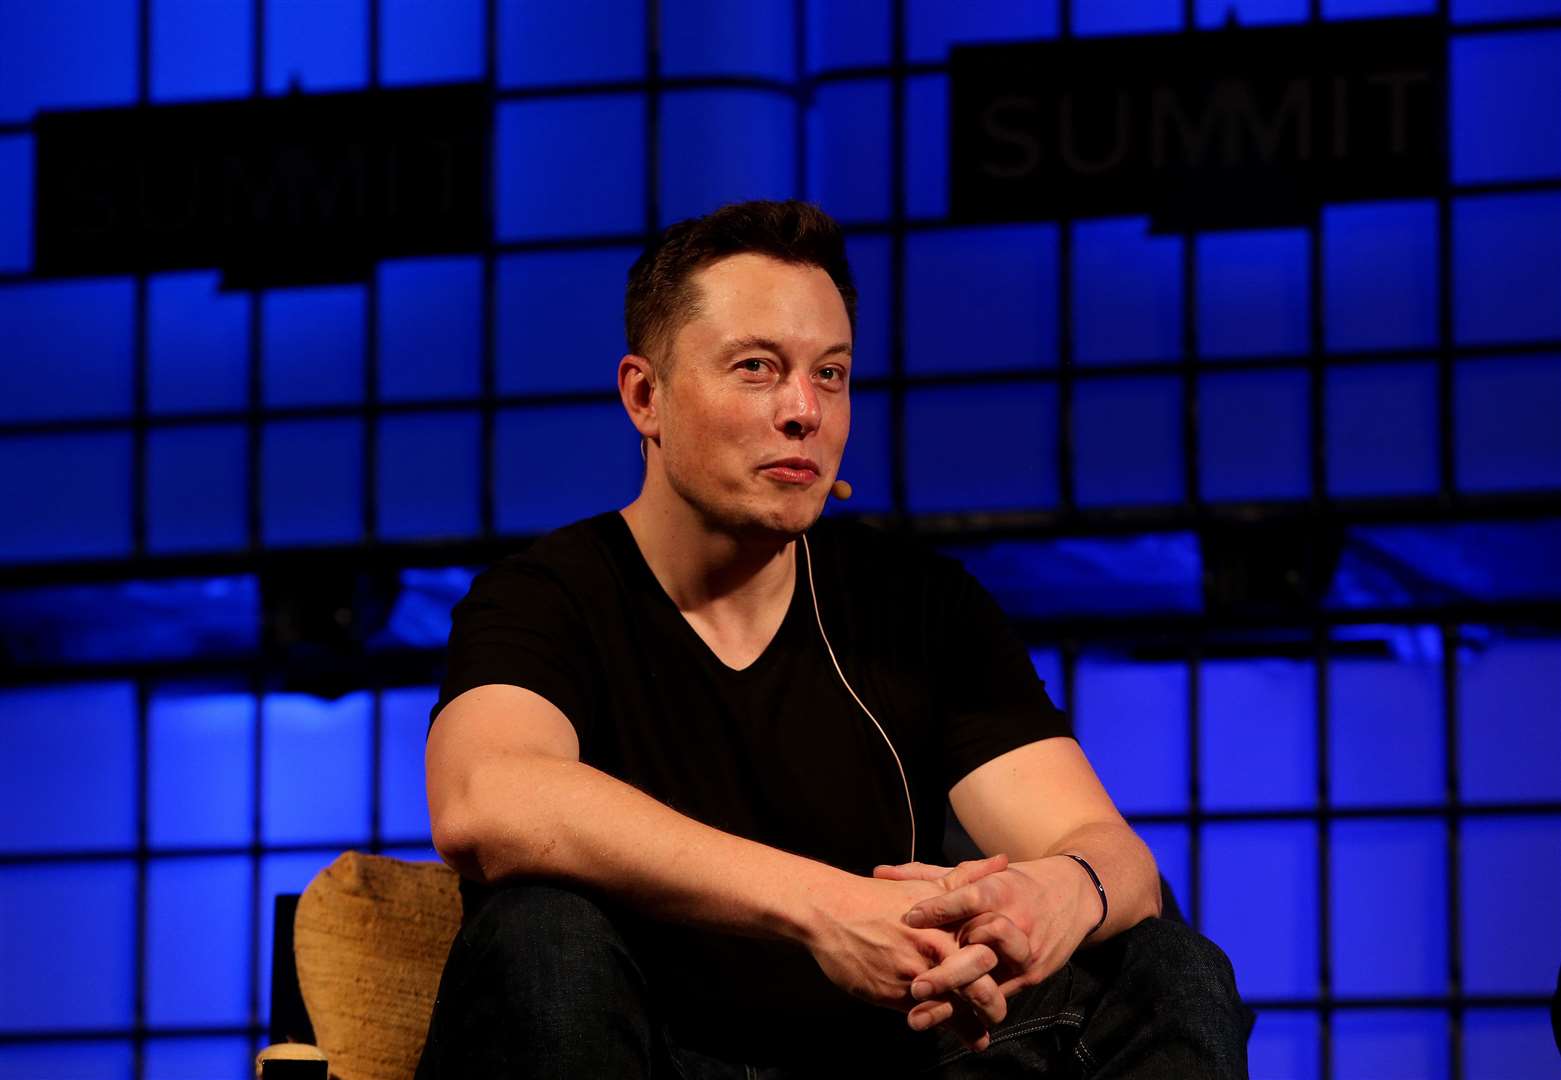 Elon Musk is believed to be attending the summit, though it is not clear if he will appear in person or virtually (Brian Lawless/PA)